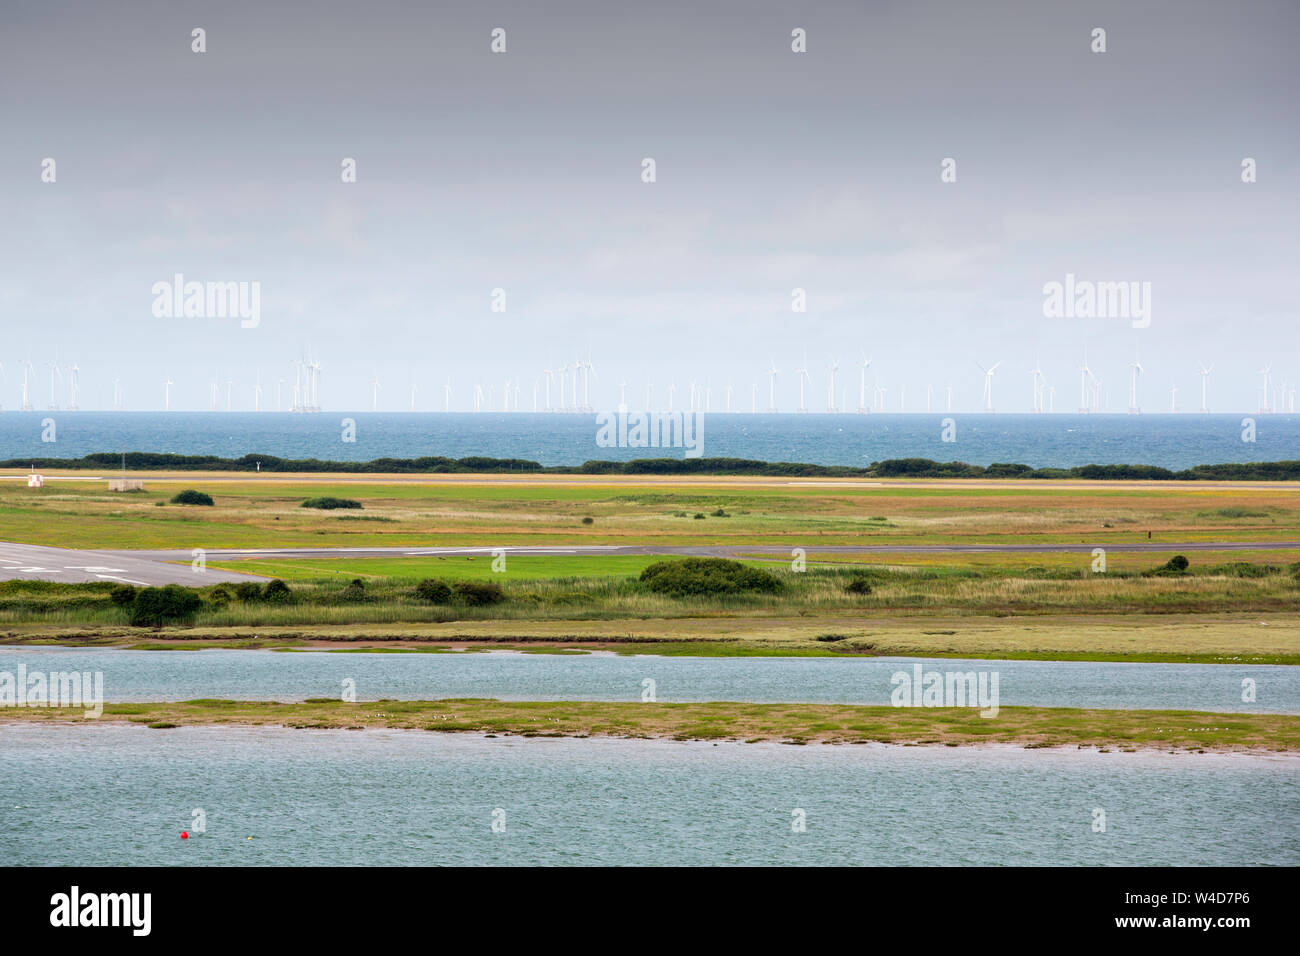 Looking across the Walney channel to Walney Island with the Walney offshore wind farm beyond, Cumbria, UK. Stock Photo